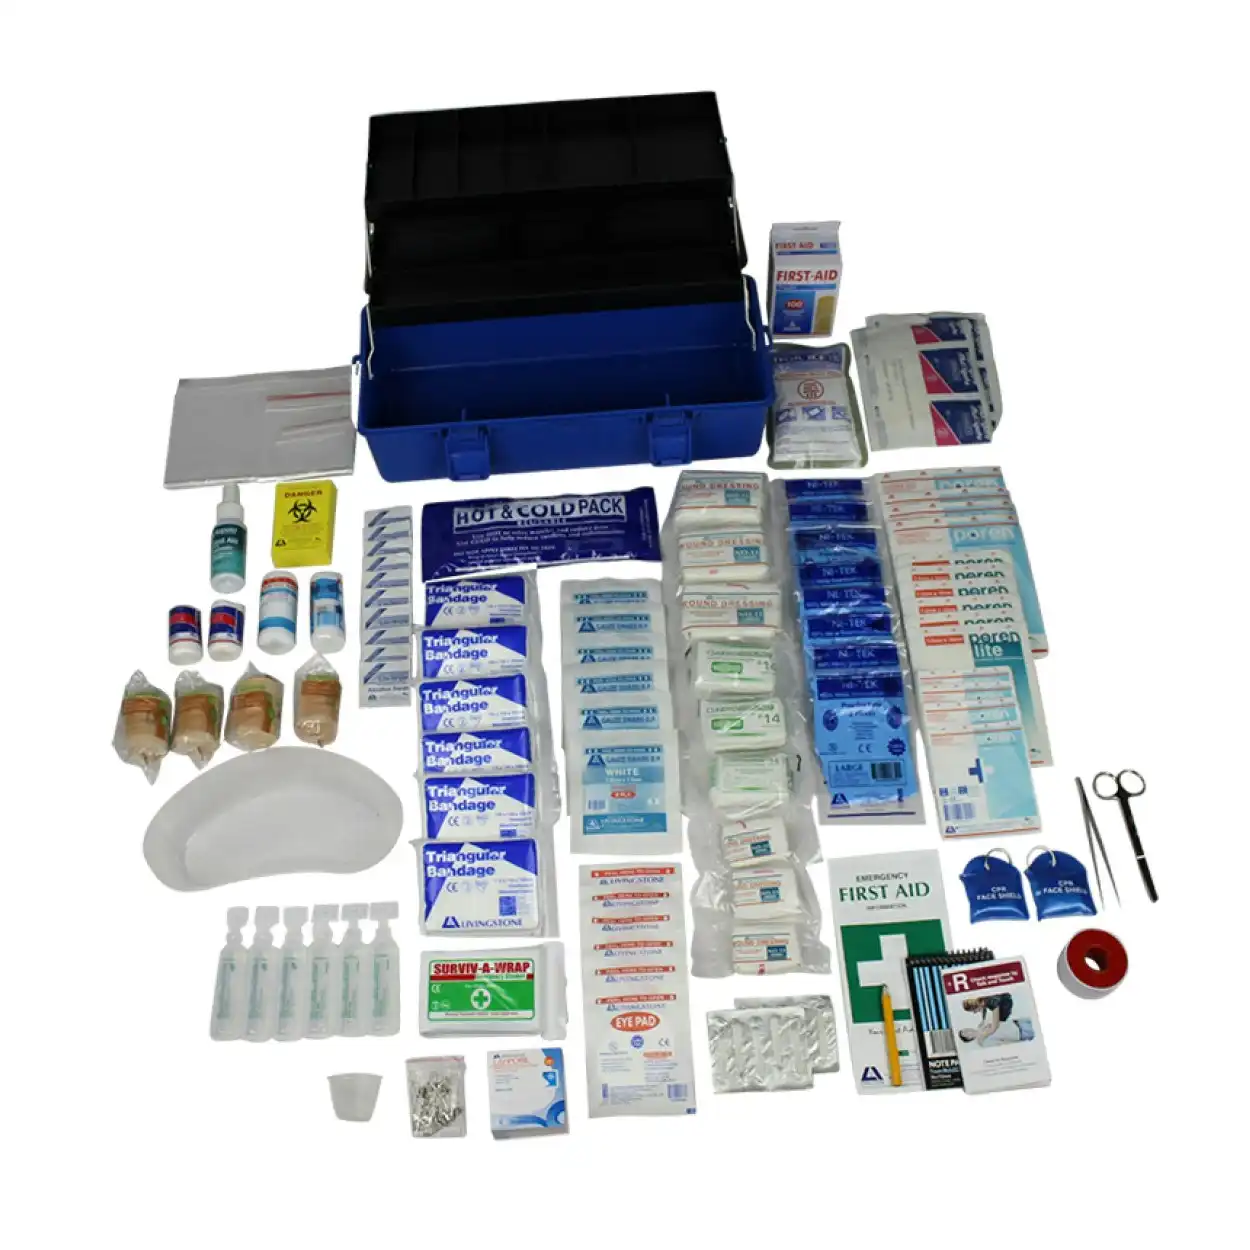 Livingstone Queensland Medium Workplace First Aid Kit Complete Set In Recyclable Plastic Case for 25-100 people